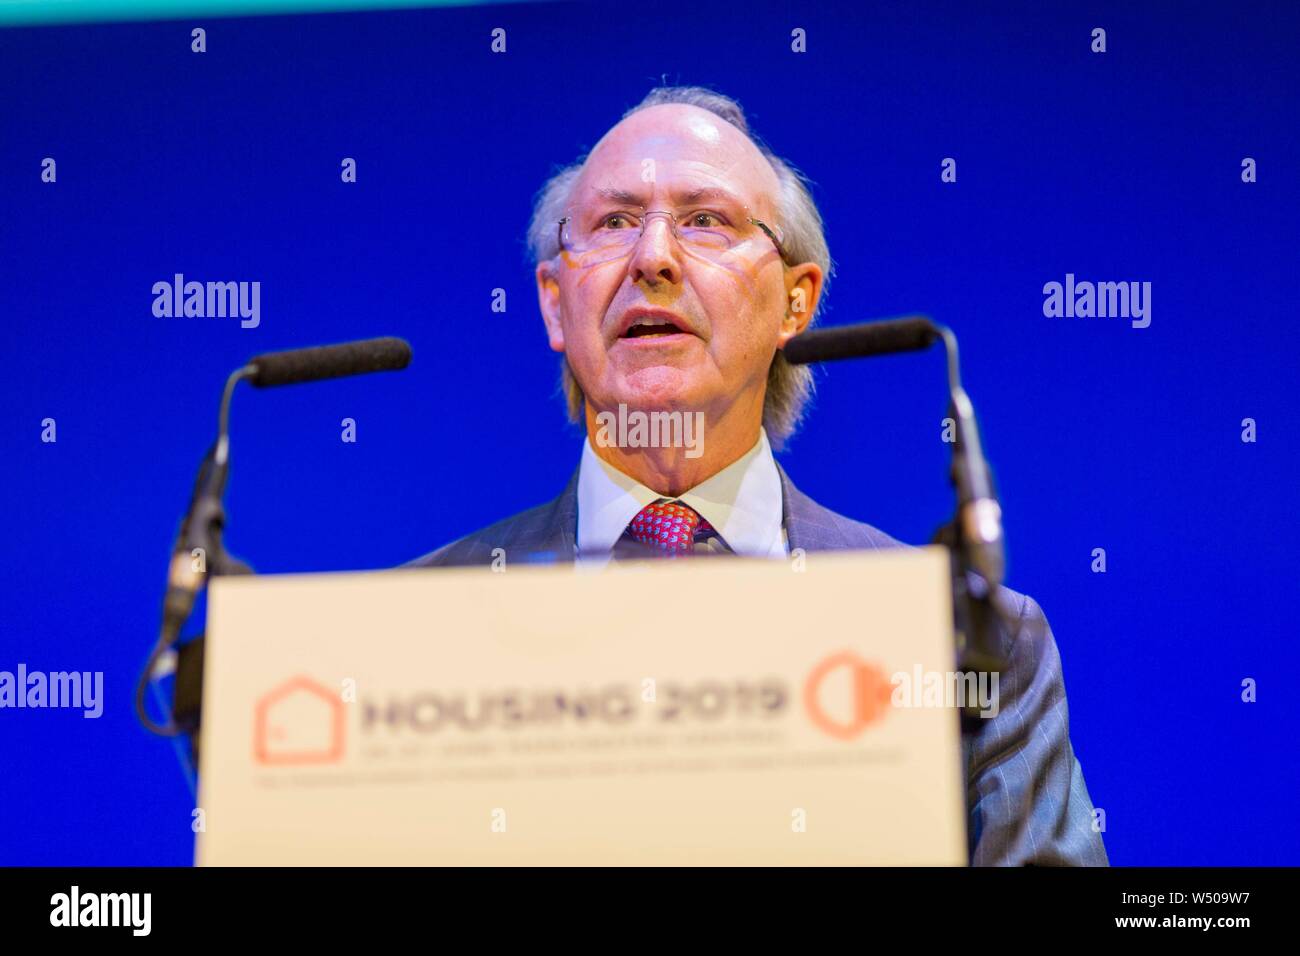 Lord Richard Best at the CIH conference 2019 Stock Photo